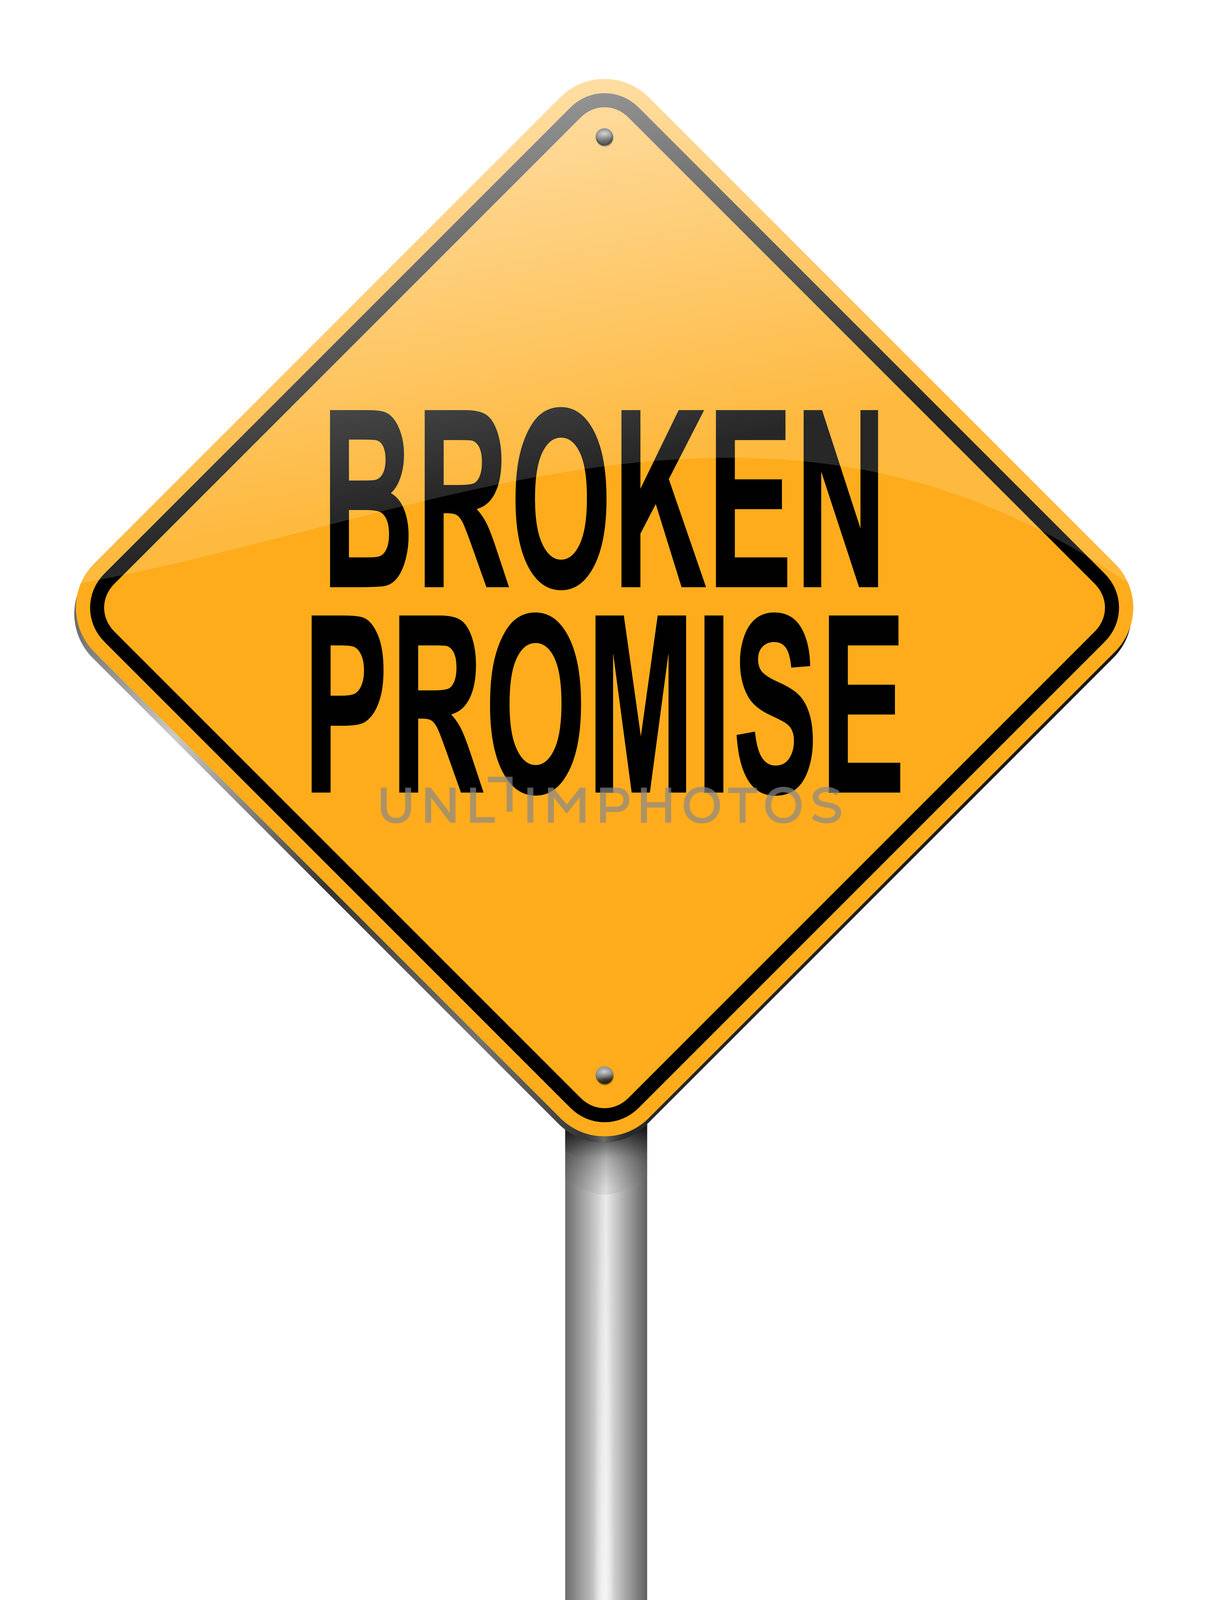 Illustration depicting a roadsign with a broken promise concept. White background.